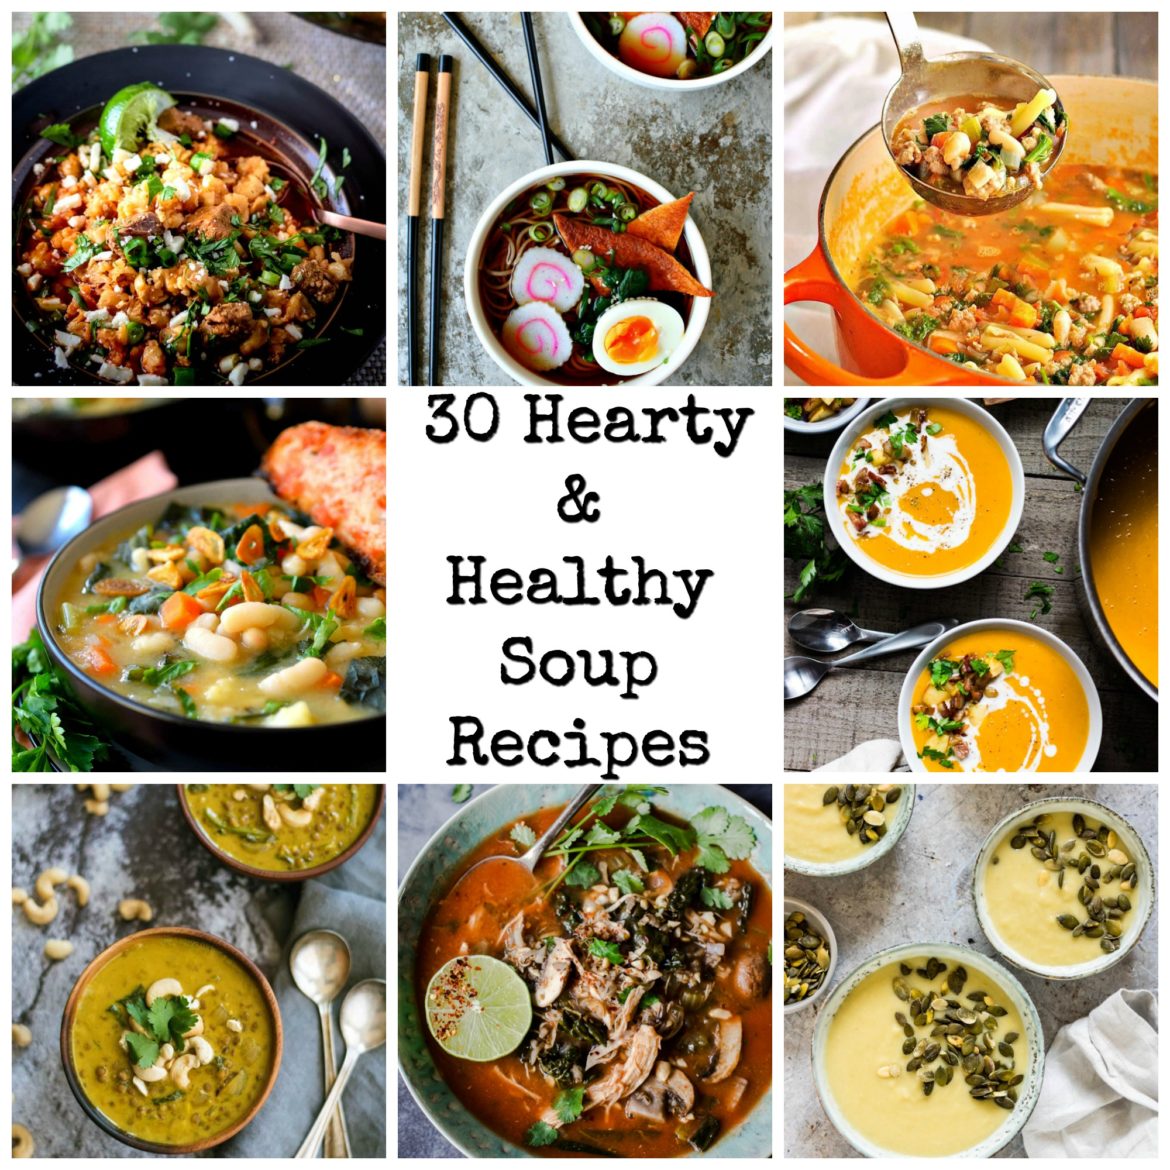 Healthy Hearty Soup Recipes | The Rustic Foodie®